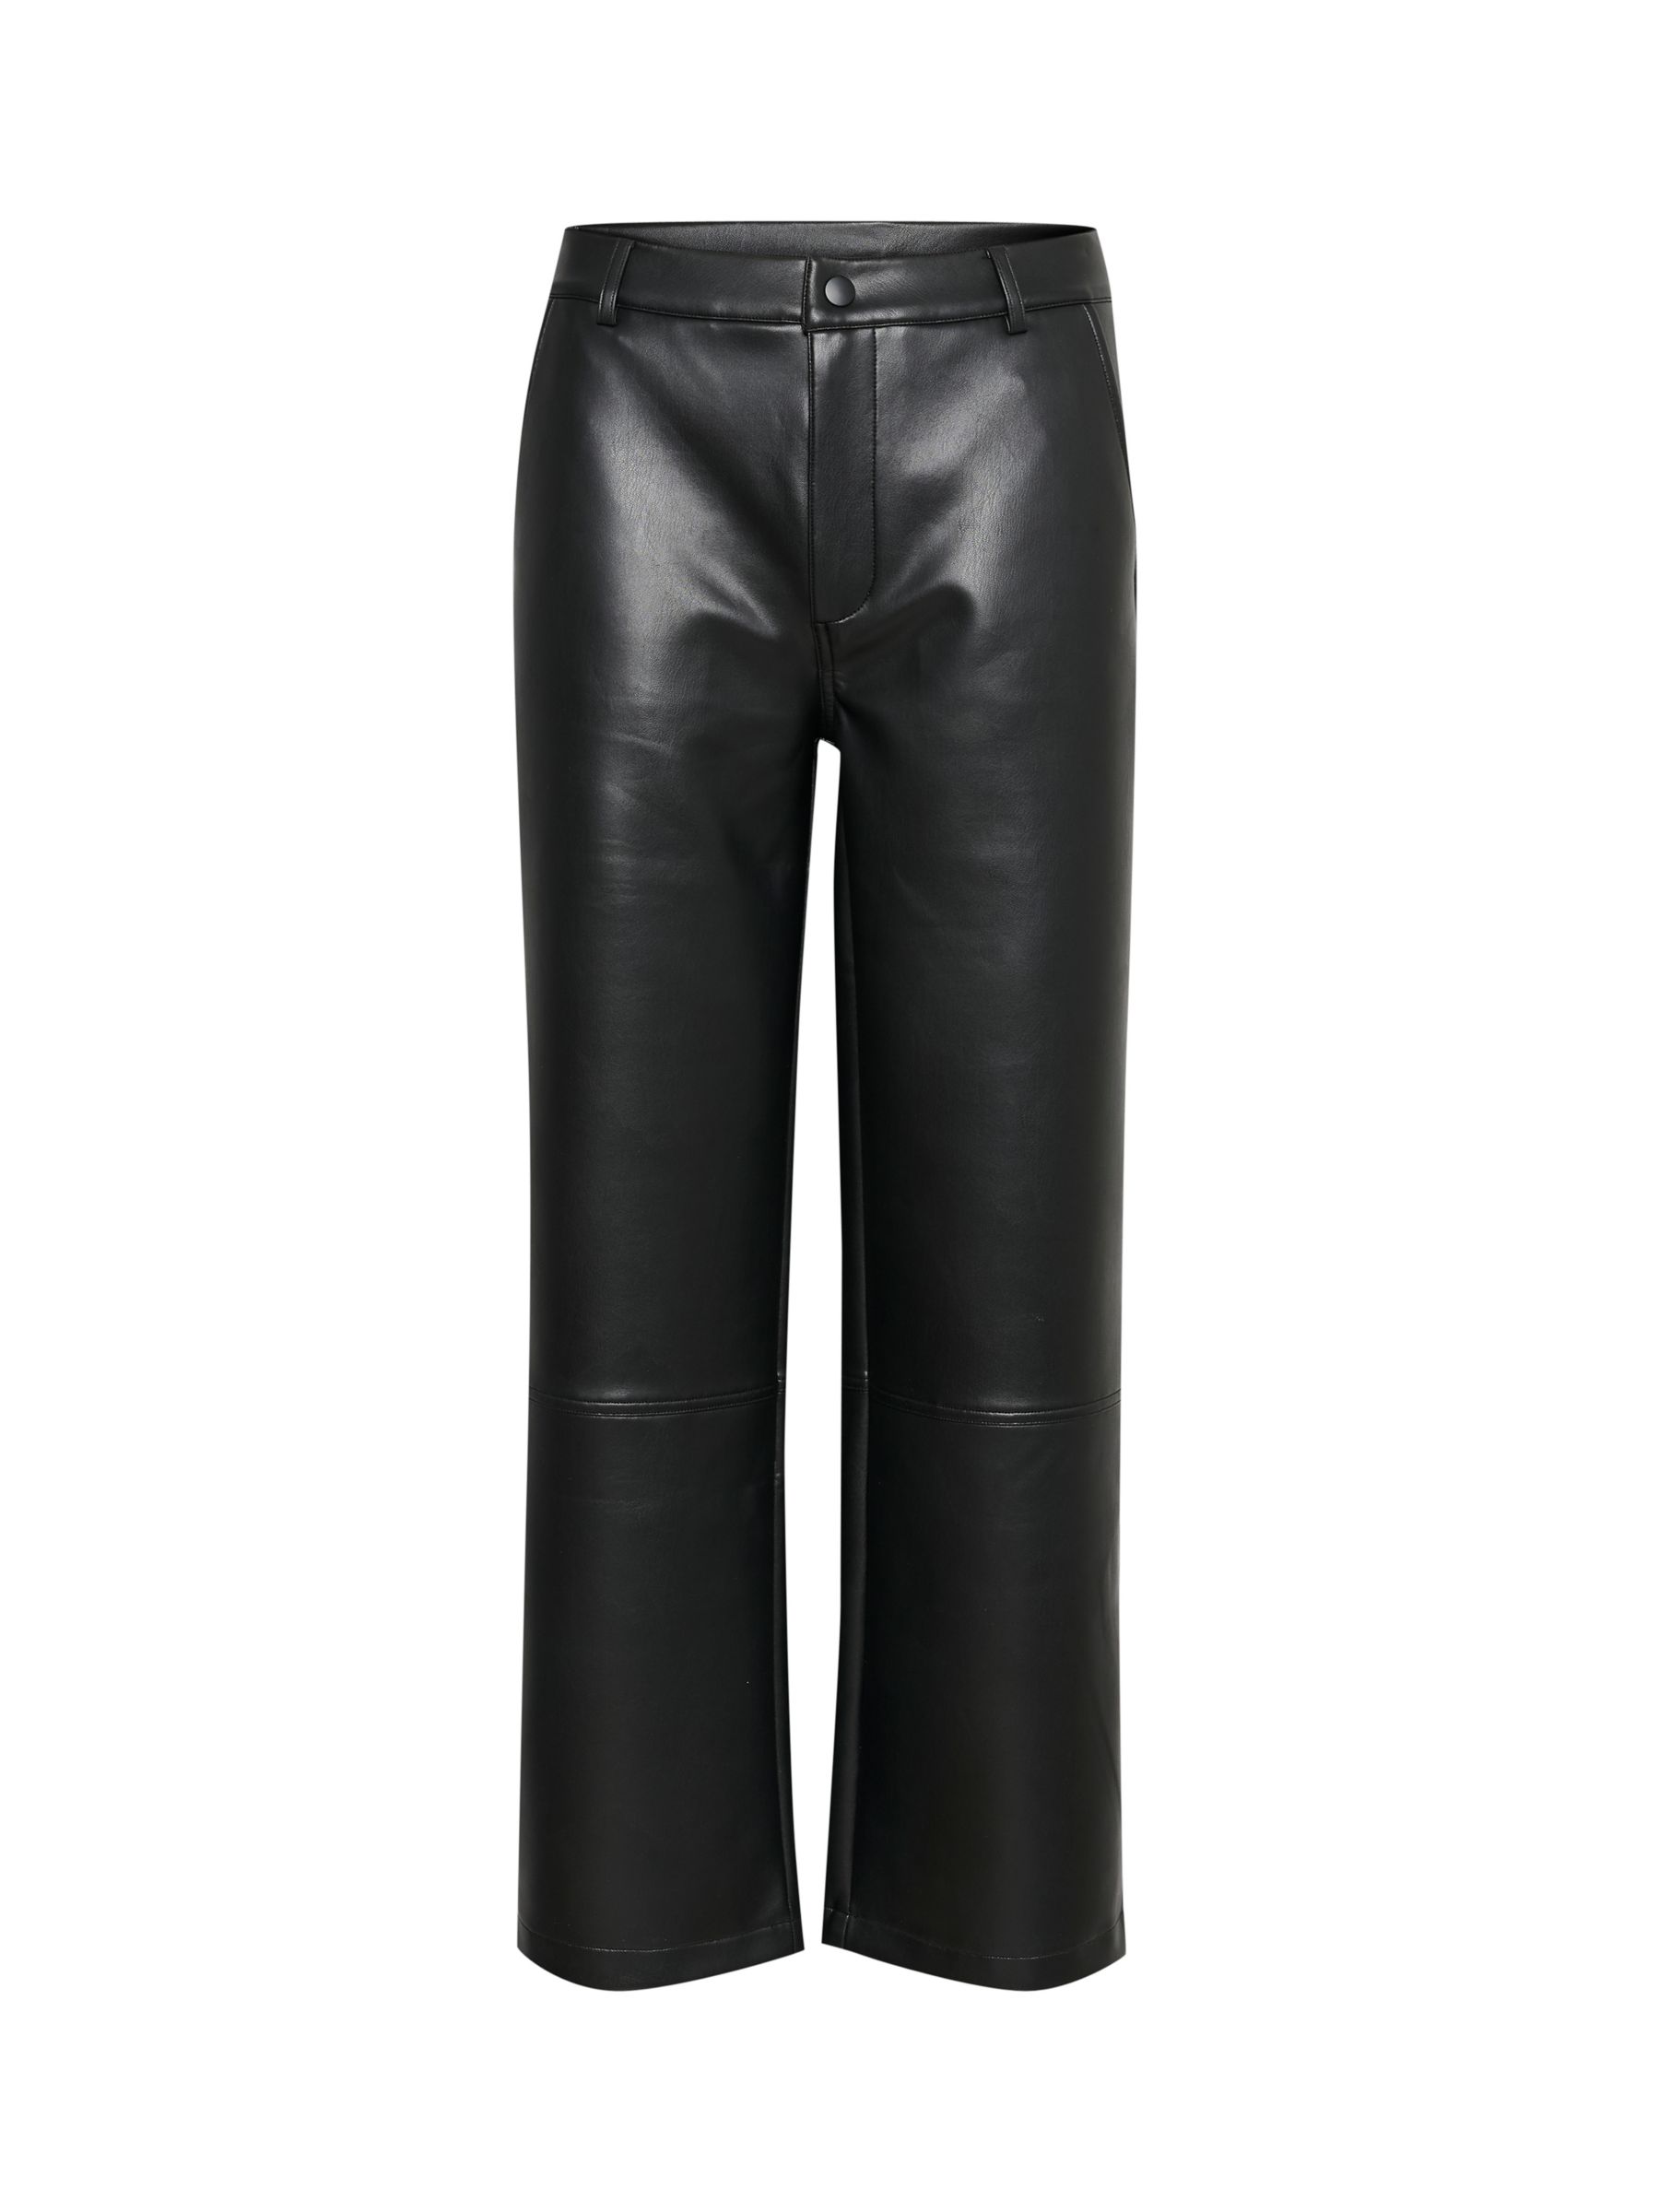 Buy KAFFE Alina Cropped Faux Leather Trousers, Black Deep Online at johnlewis.com